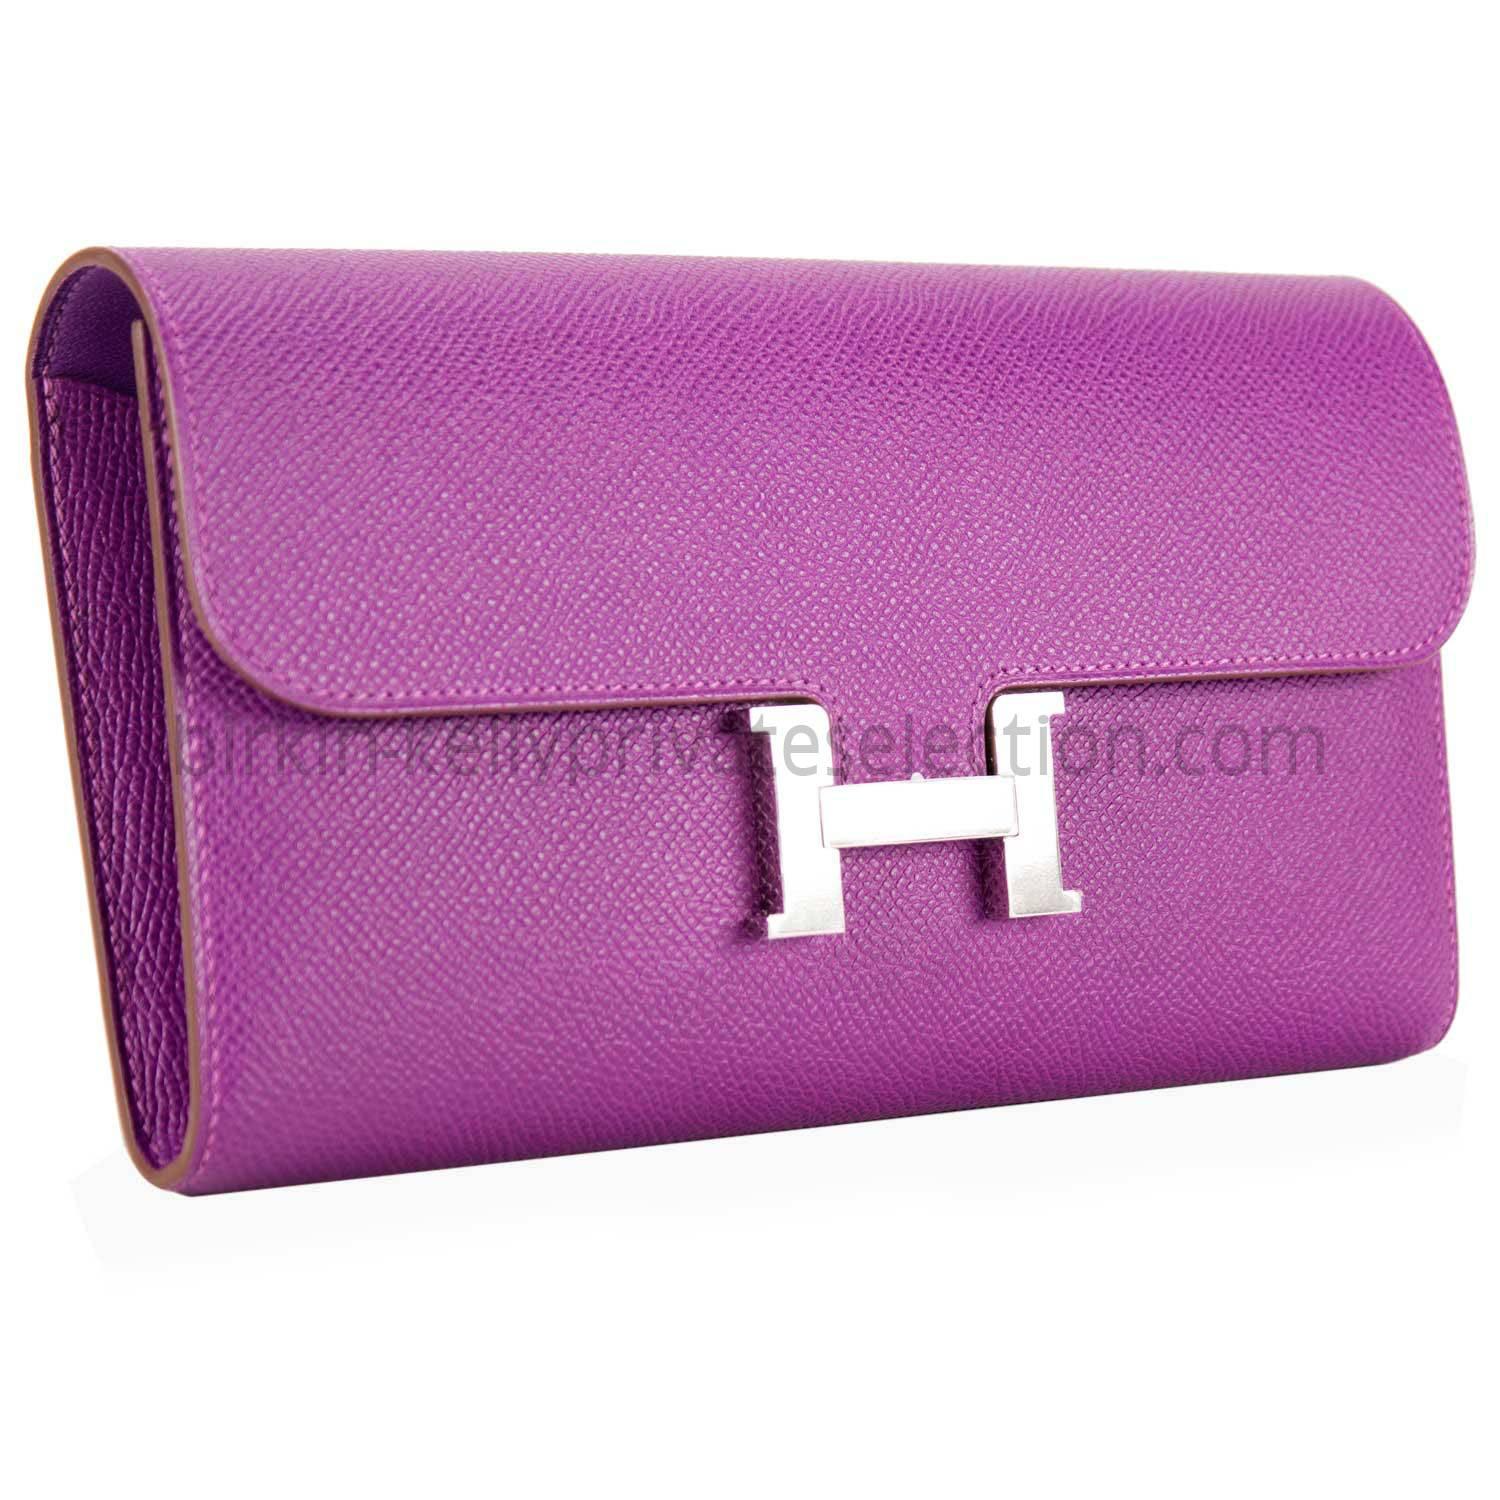 Hermes Wallet Epsom CONSTANCE Anemone Palladium Hardware 2015

Pre-owned and never used.

Bought it in hermes store in 2015

Model:   KELLY  CLASIQUE

Color: Anemone

Details:

With the protective plastic intact.

Comes with original